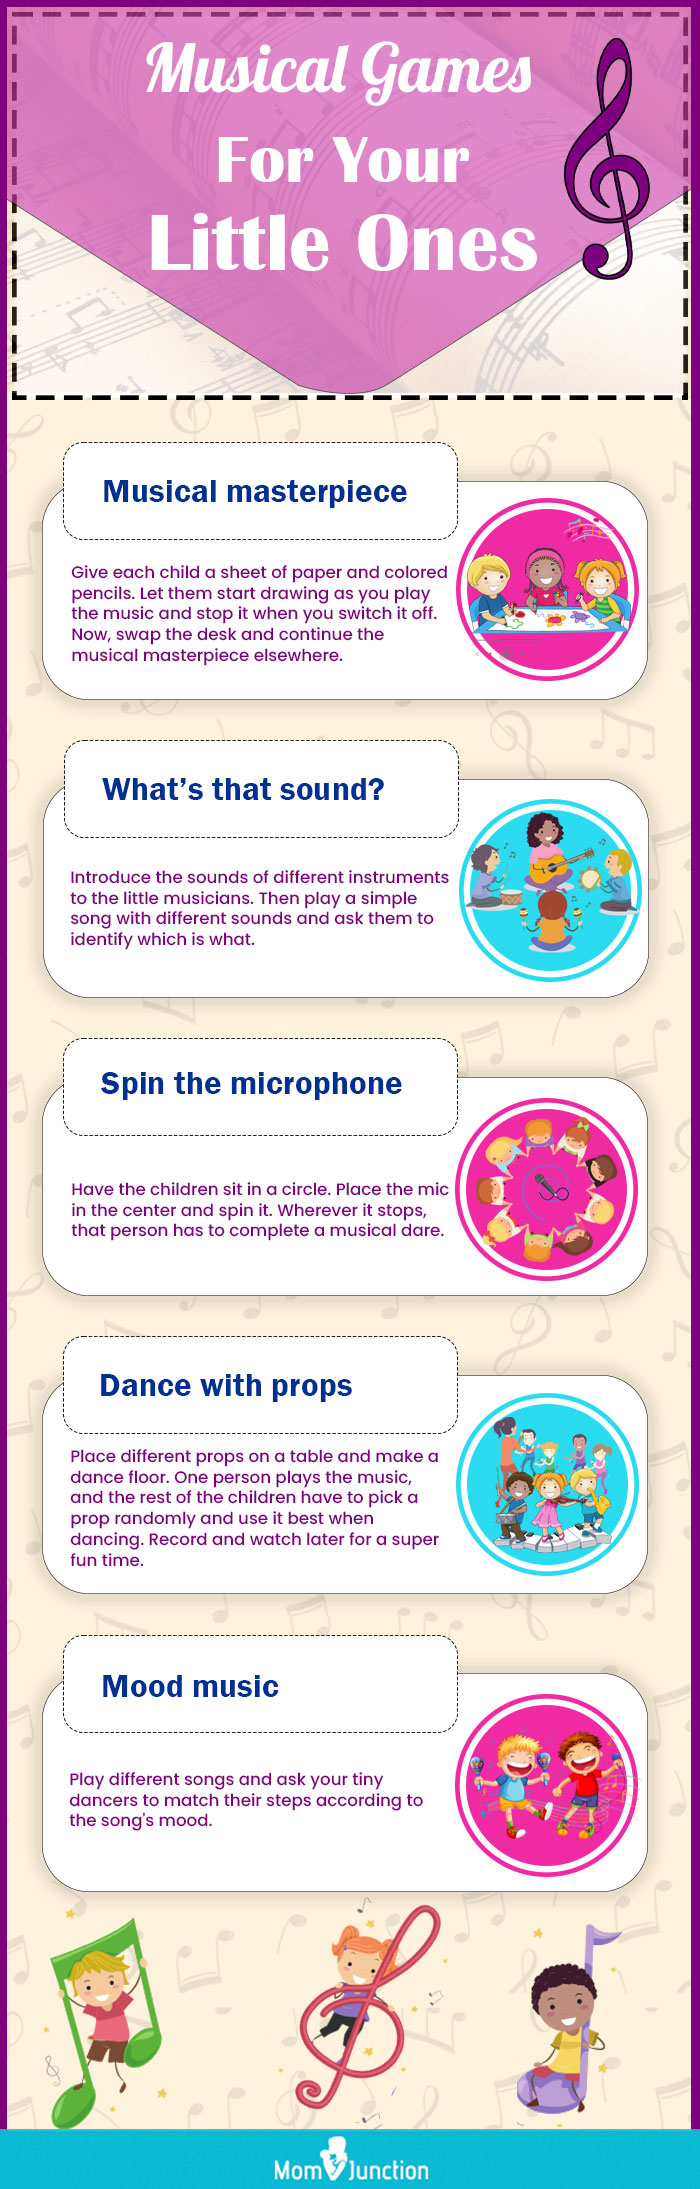 19 Free Online Resources For Children's Educational Games & Activities